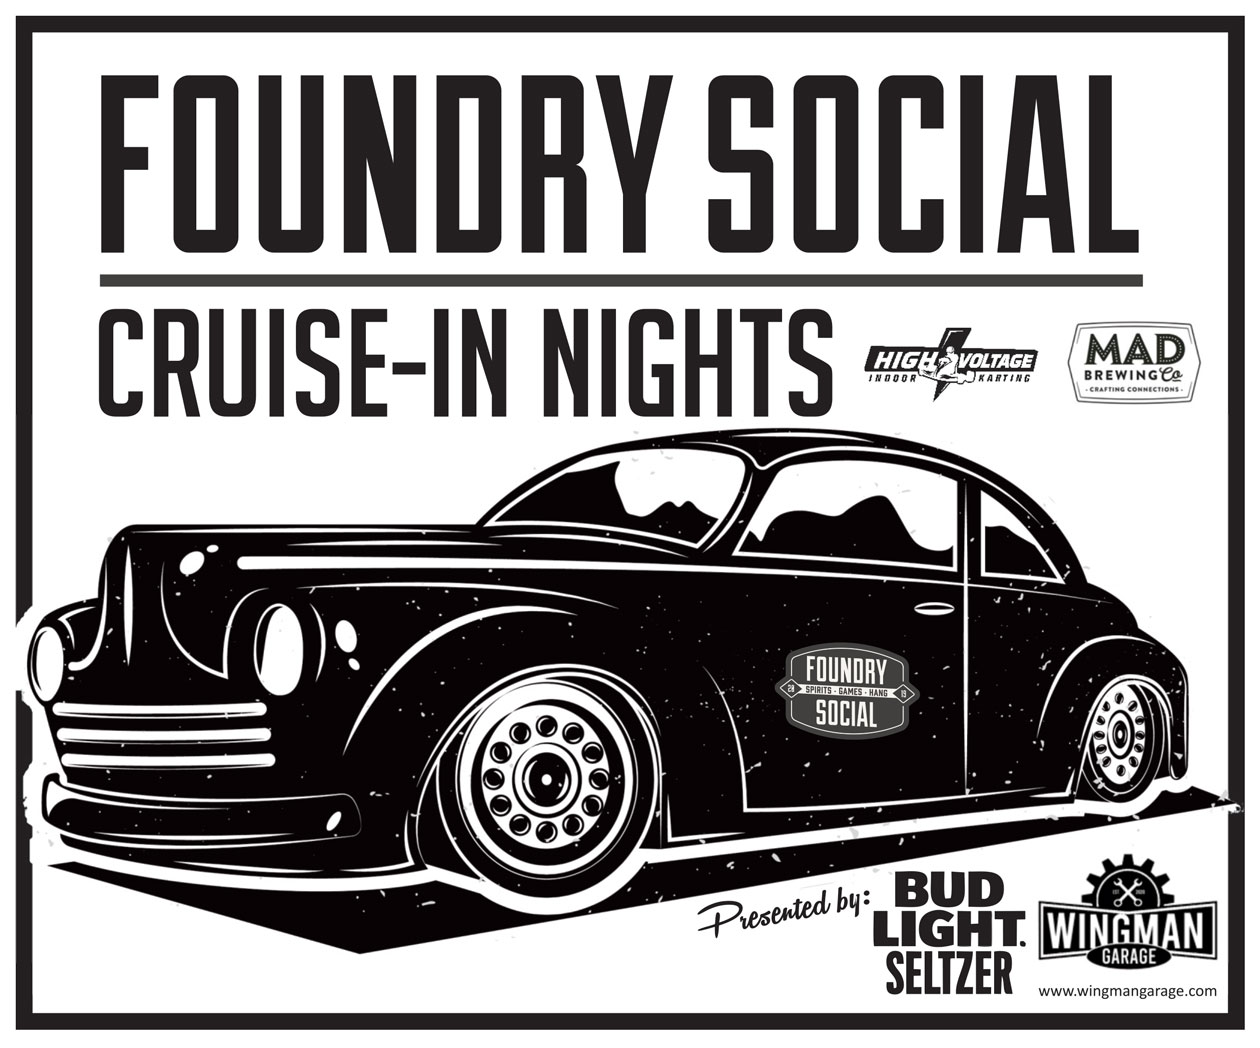 Foundry Social Cruise-In Nights